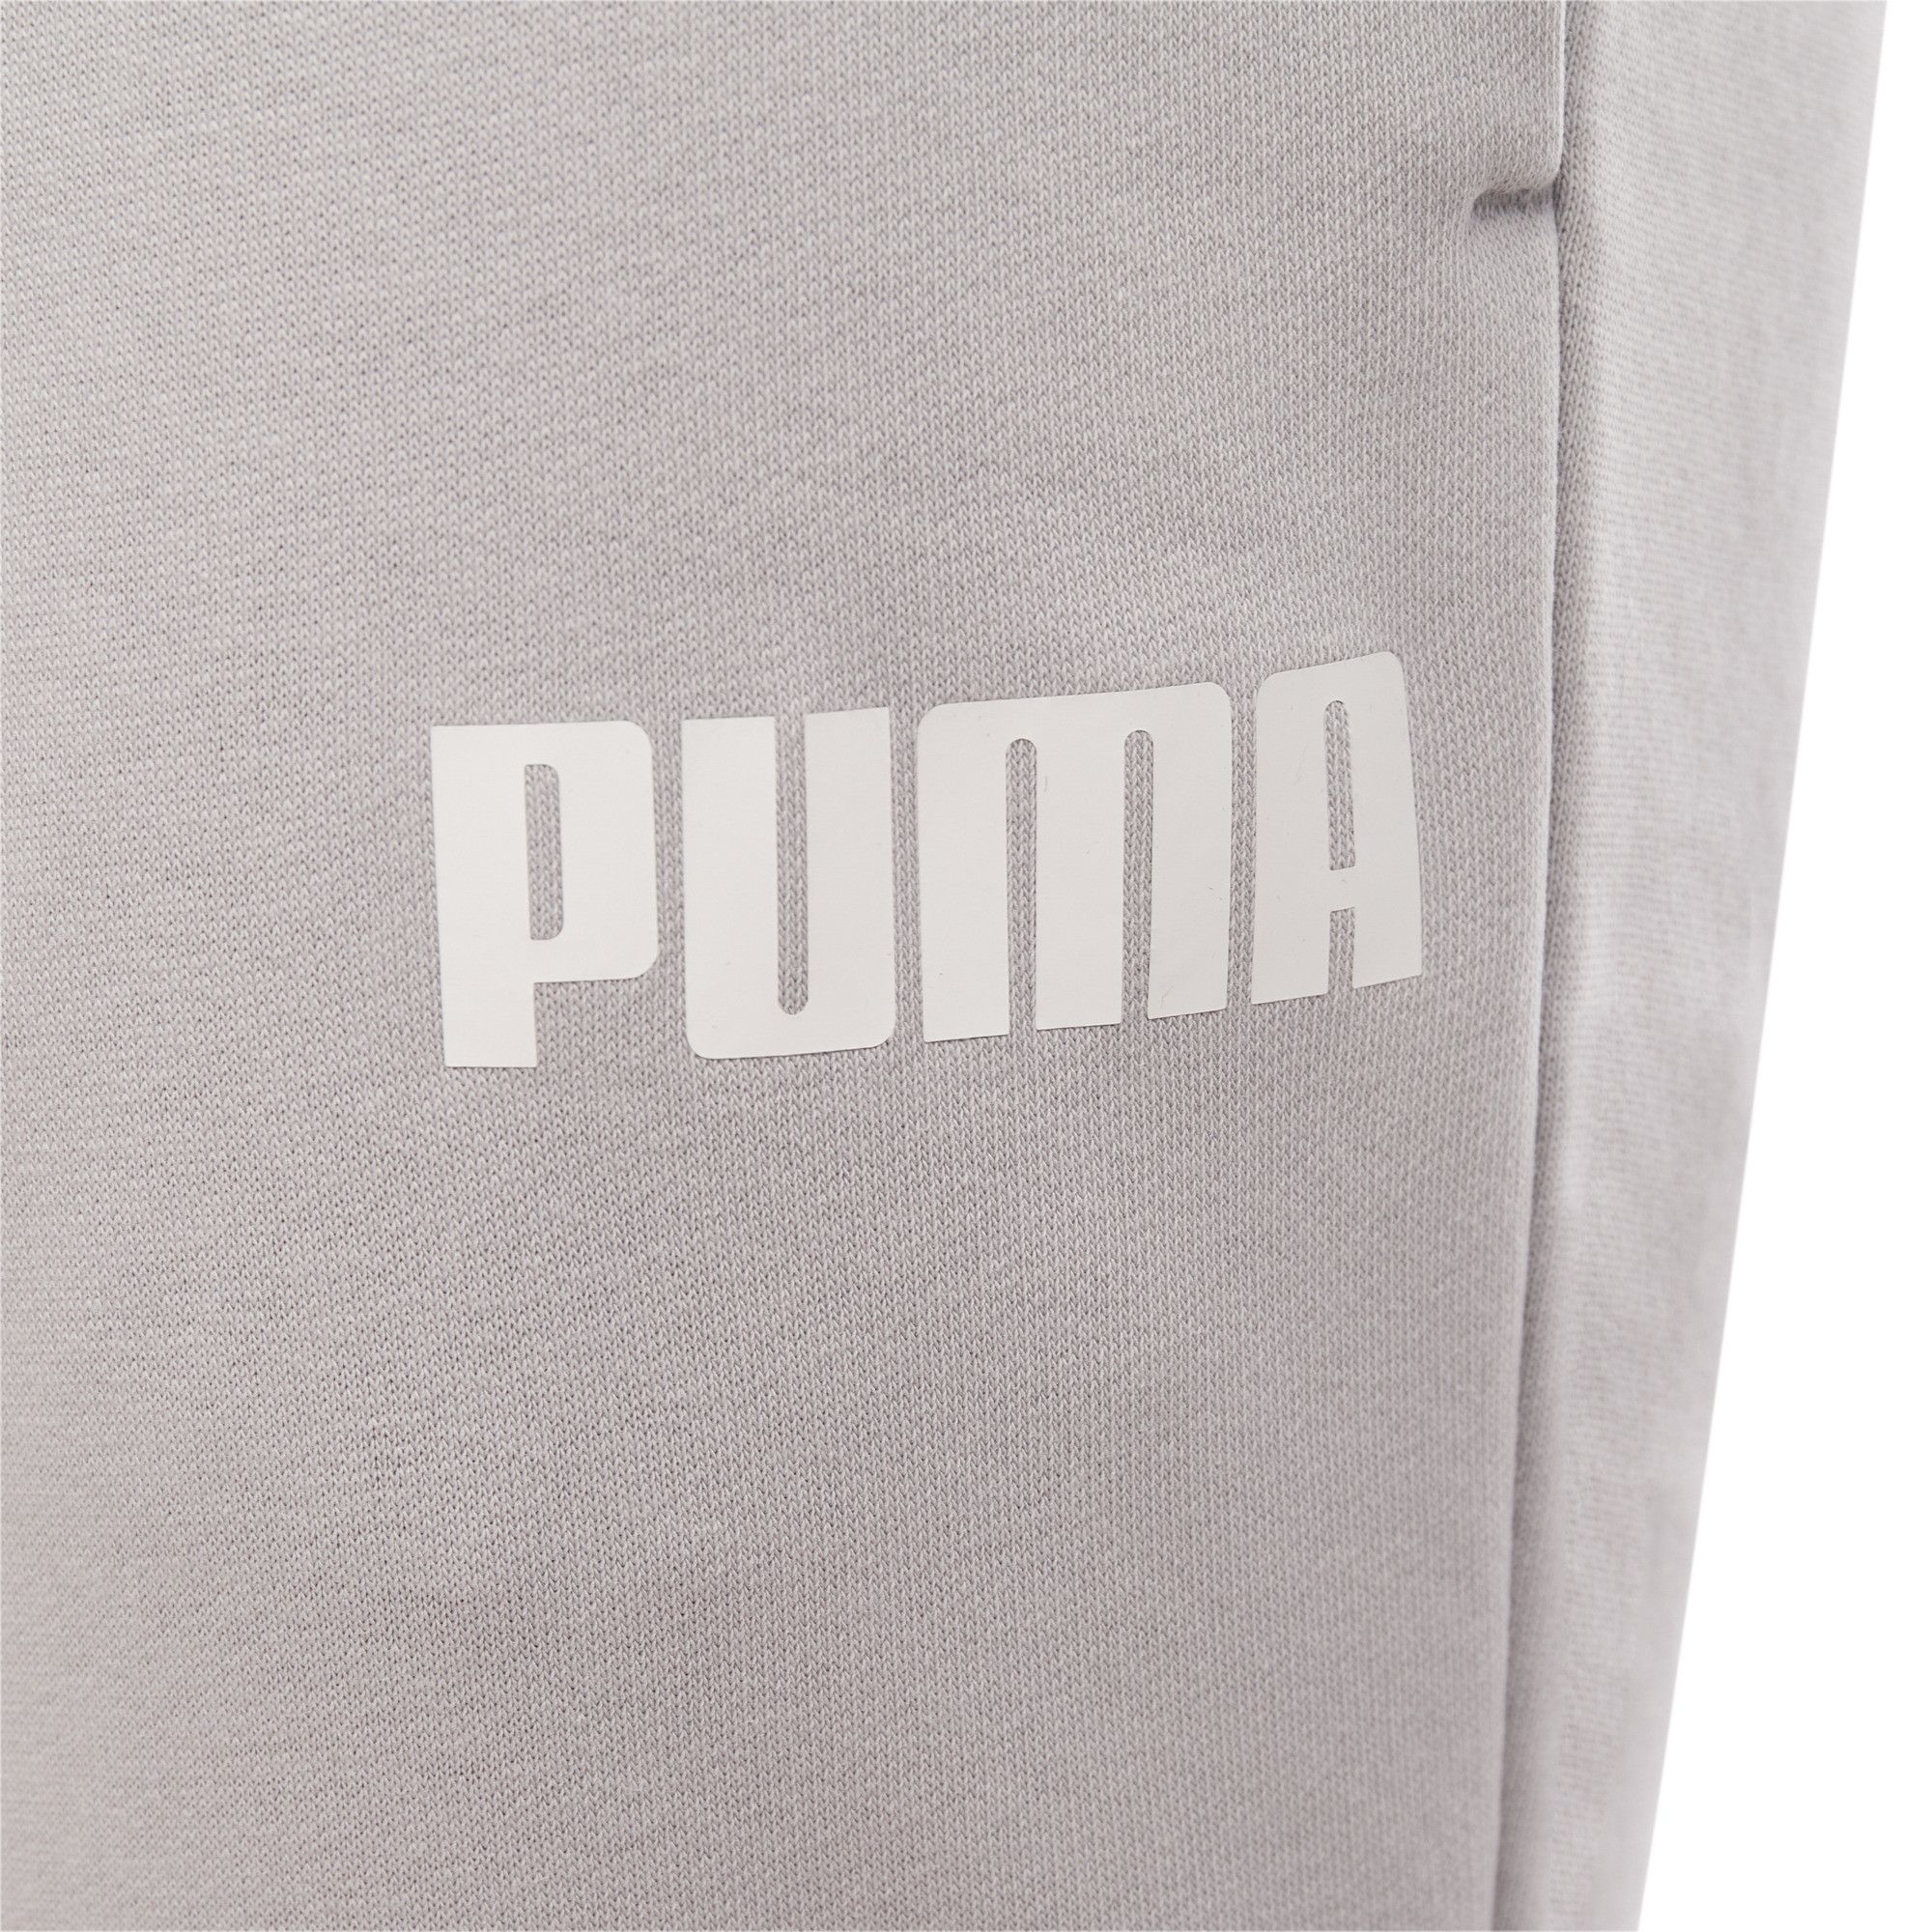  Athletic PUMA DNA meets comfy, casual style. Throw on the Tape Pants in French terry and conquer the day the comfortable way. FEATURES & BENEFITS Recycled Content: Made with at least 20% recycled material as a step toward a better future DETAILS Regular fitComfortable style by PUMAPUMA branding detailsSignature PUMA design elements